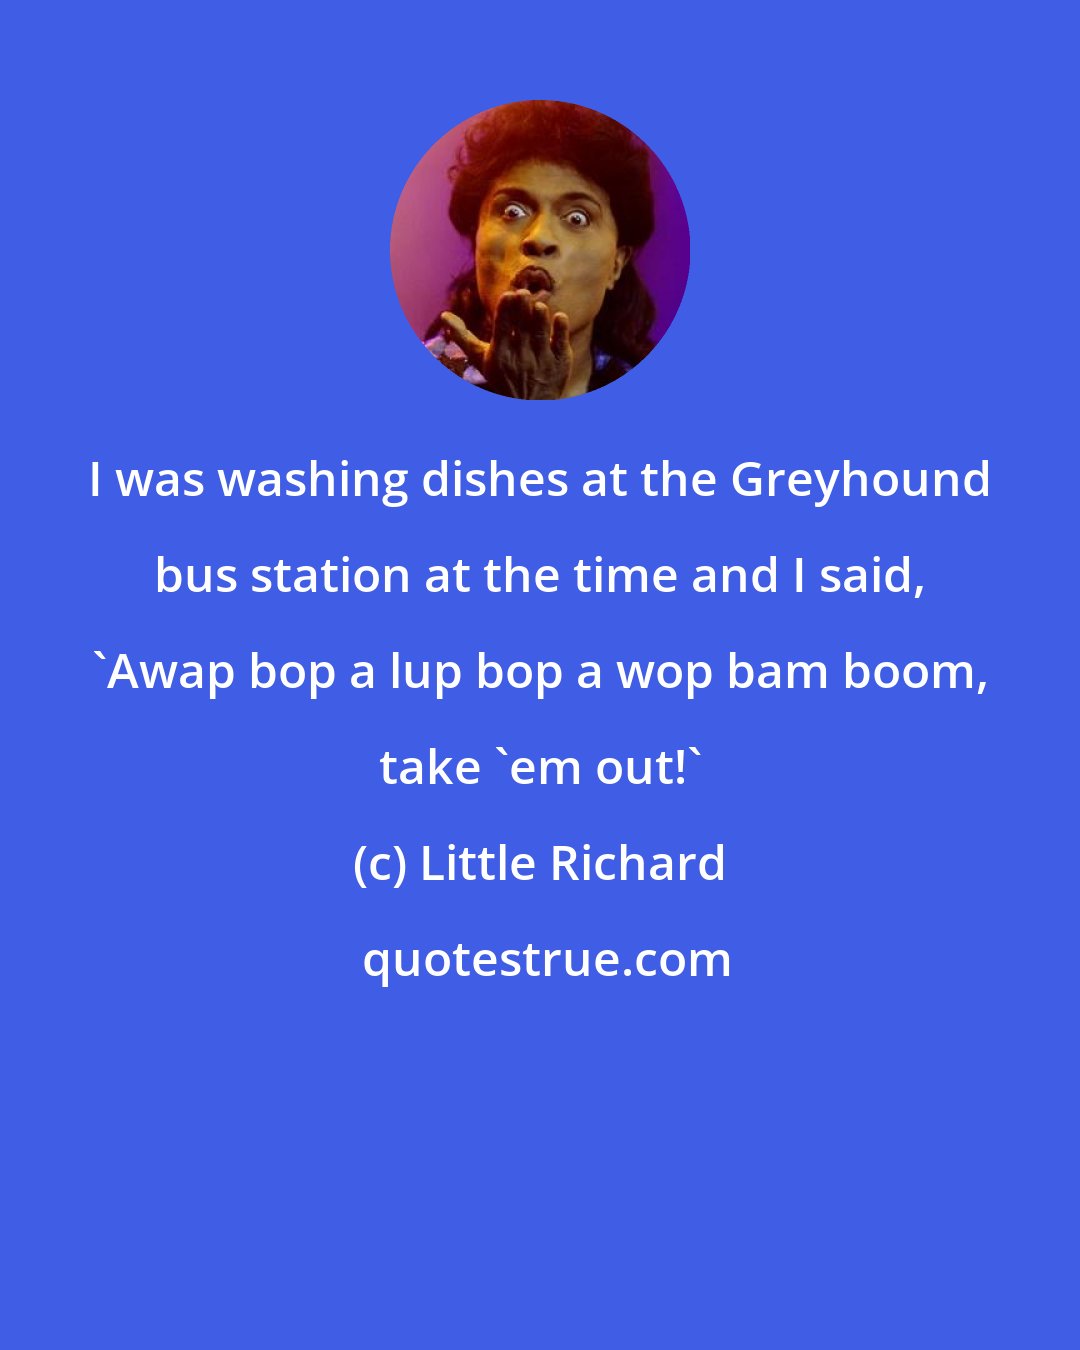 Little Richard: I was washing dishes at the Greyhound bus station at the time and I said, 'Awap bop a lup bop a wop bam boom, take 'em out!'